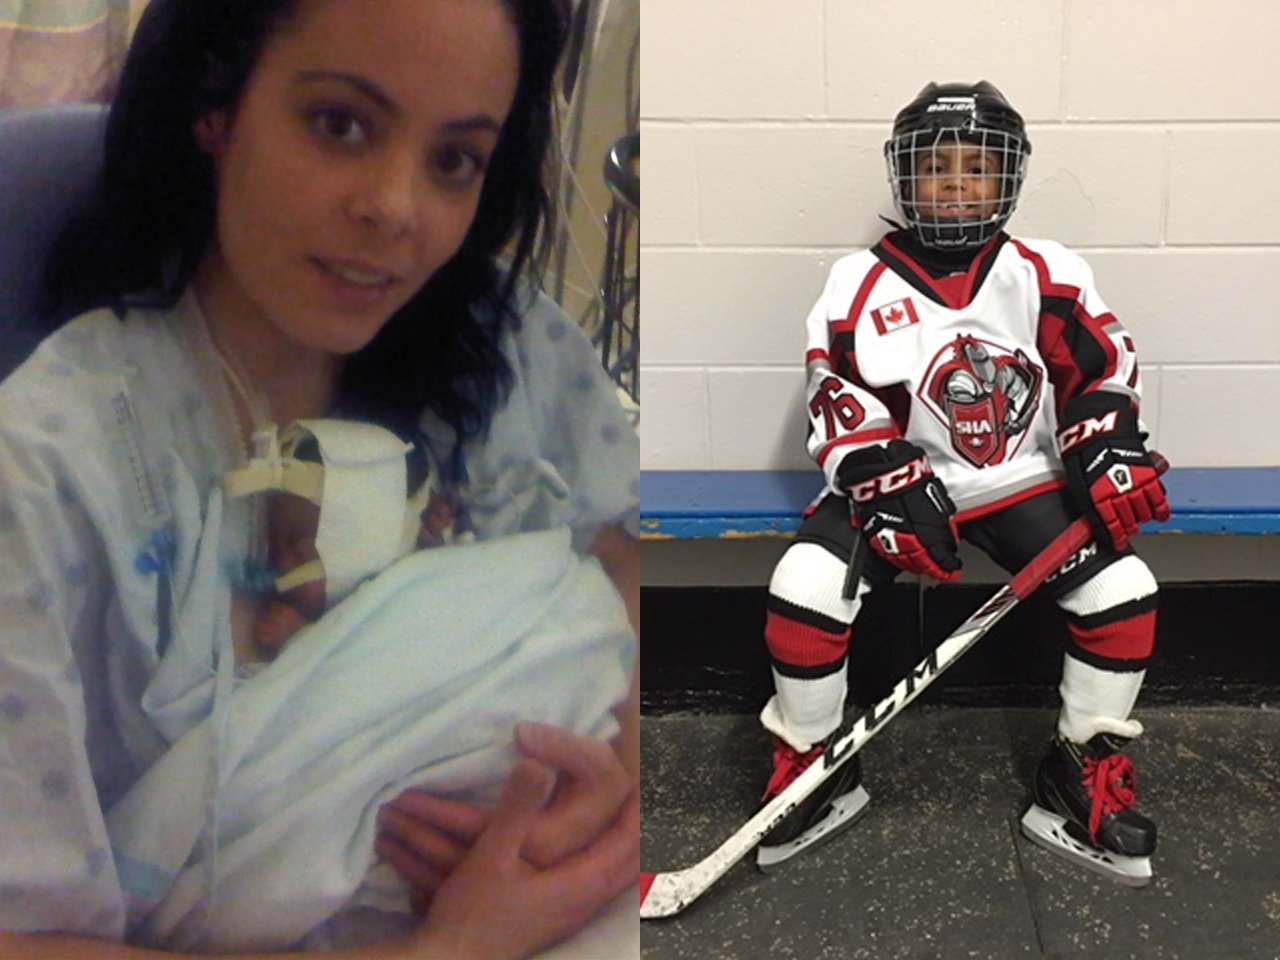 Split photo, first of mom holding preemie baby in the NICU, second of little boy in full hockey gear sitting on locker room bench